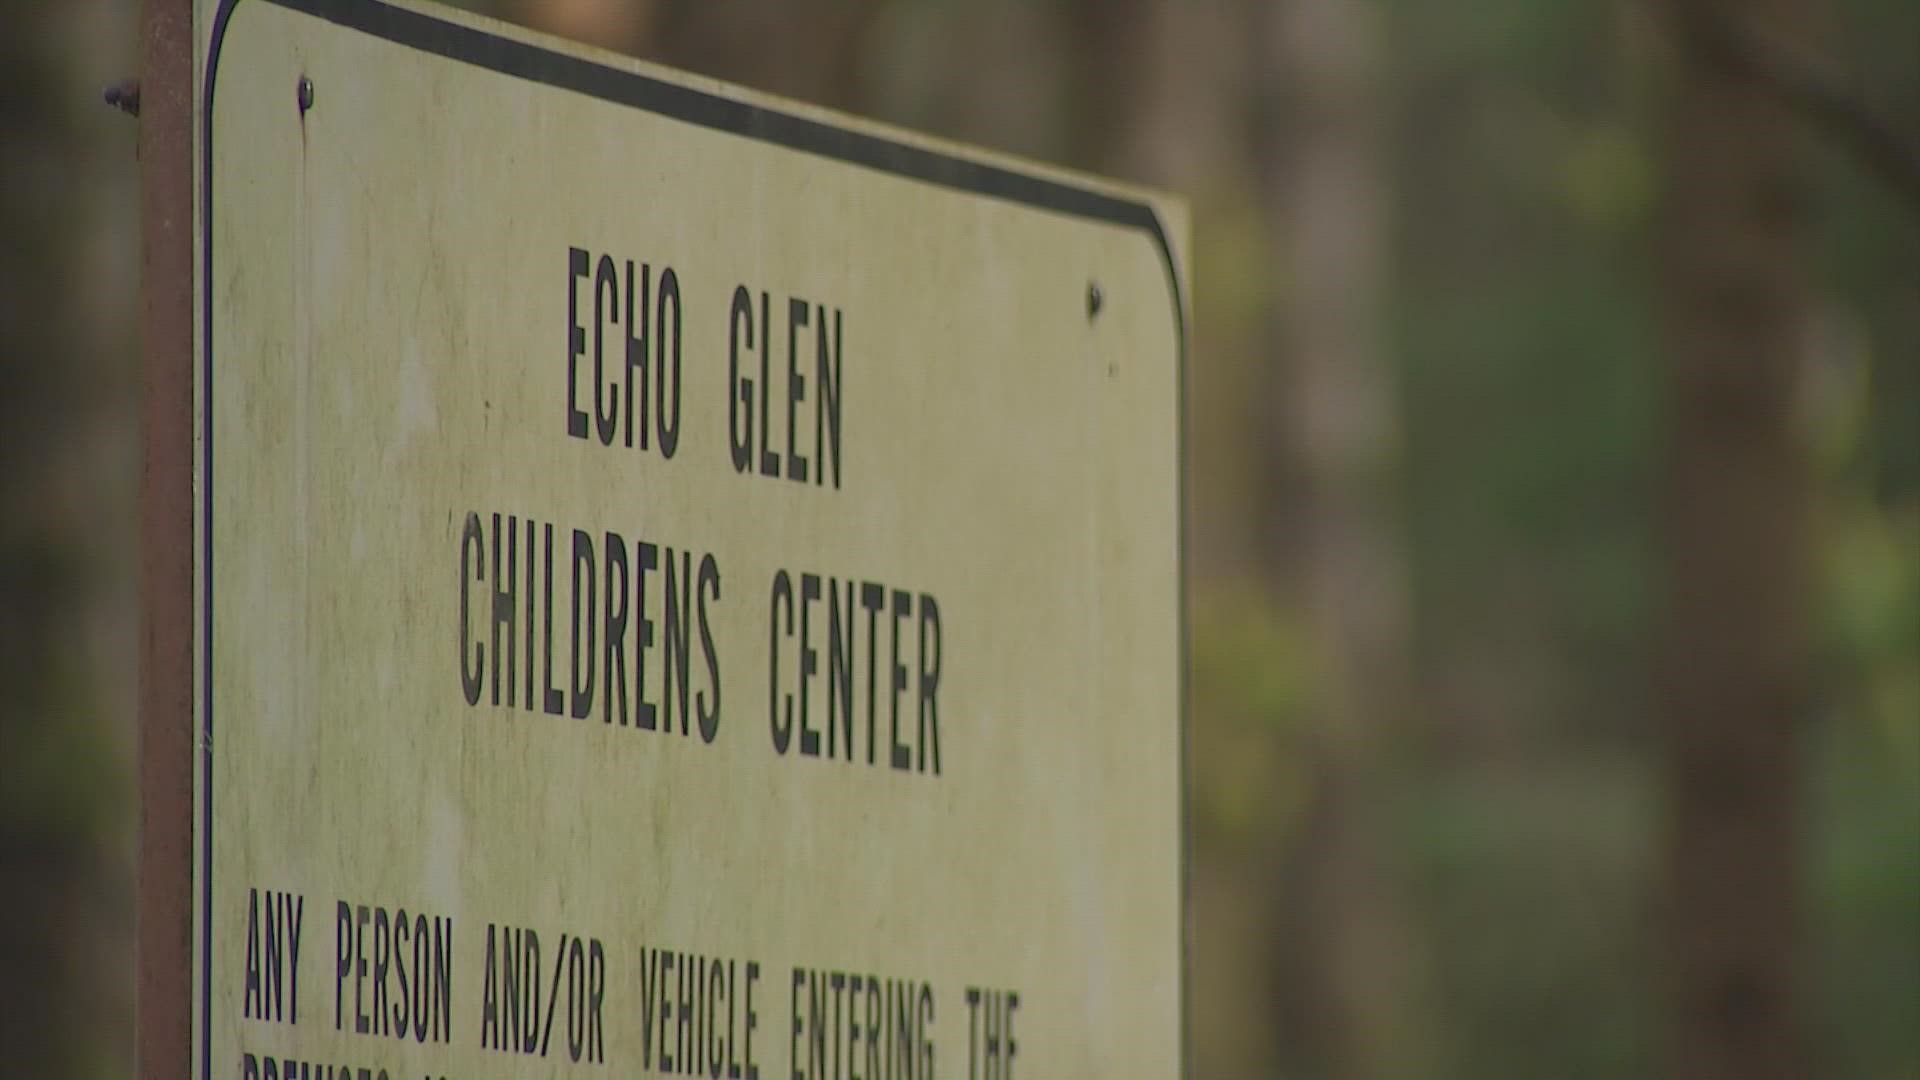 Five teens are accused of assaulting Echo Glen Children's Center staff before escaping in a state-owned vehicle last week.